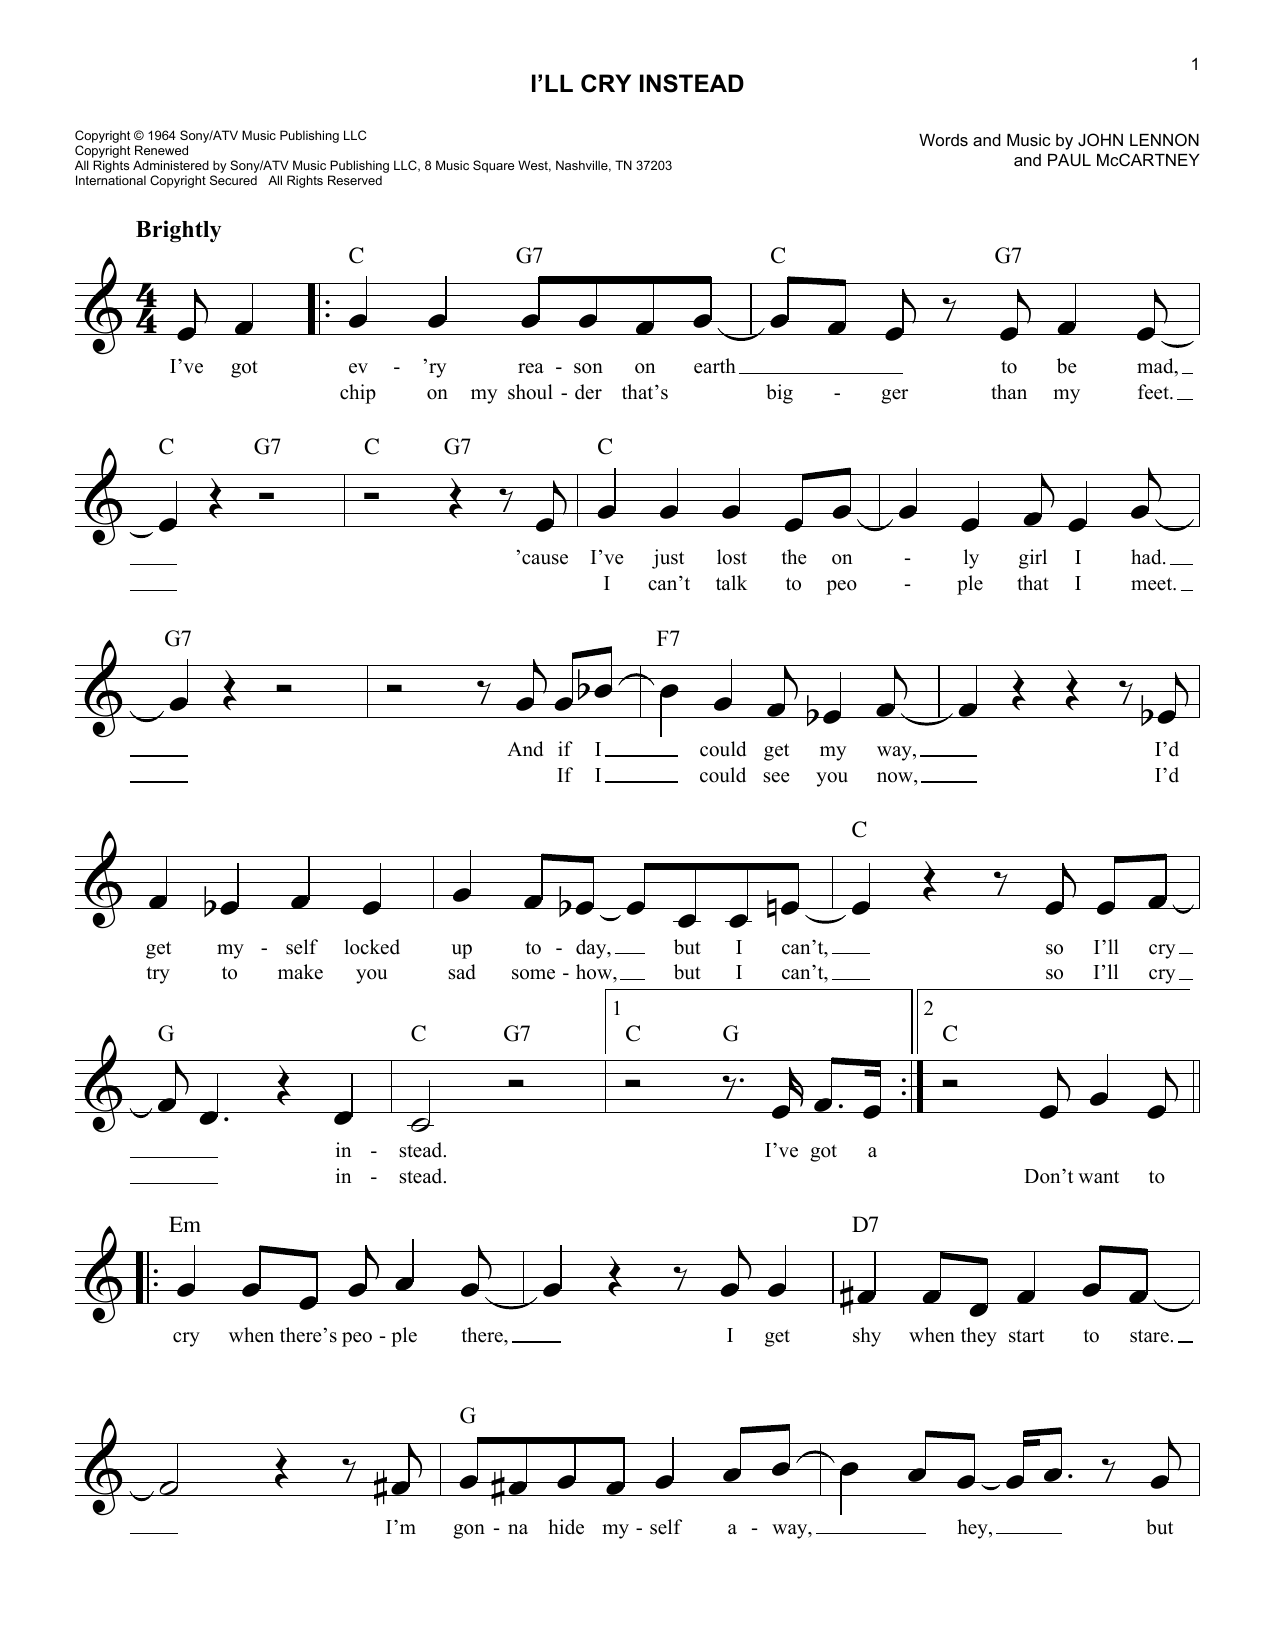 Download The Beatles I'll Cry Instead Sheet Music